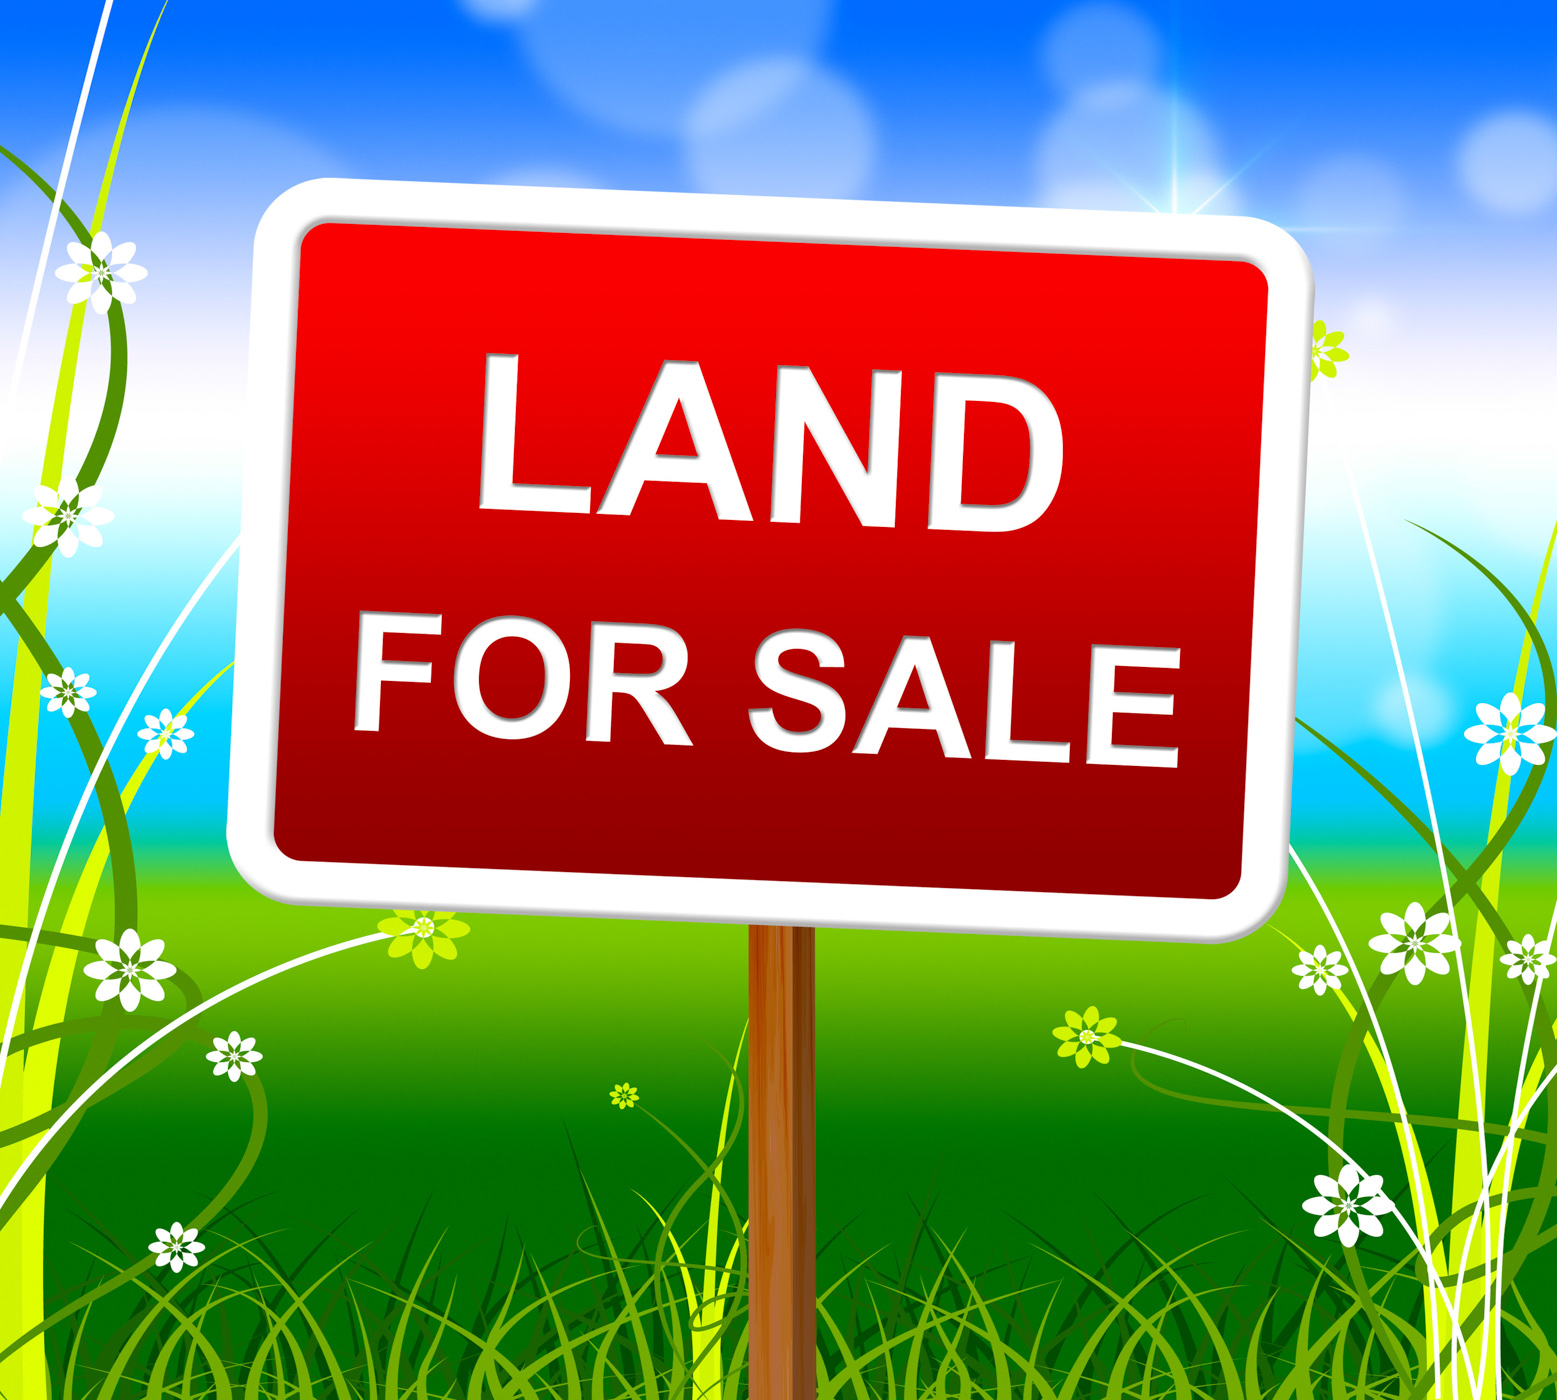 Land for sale shows real estate agent and selling photo